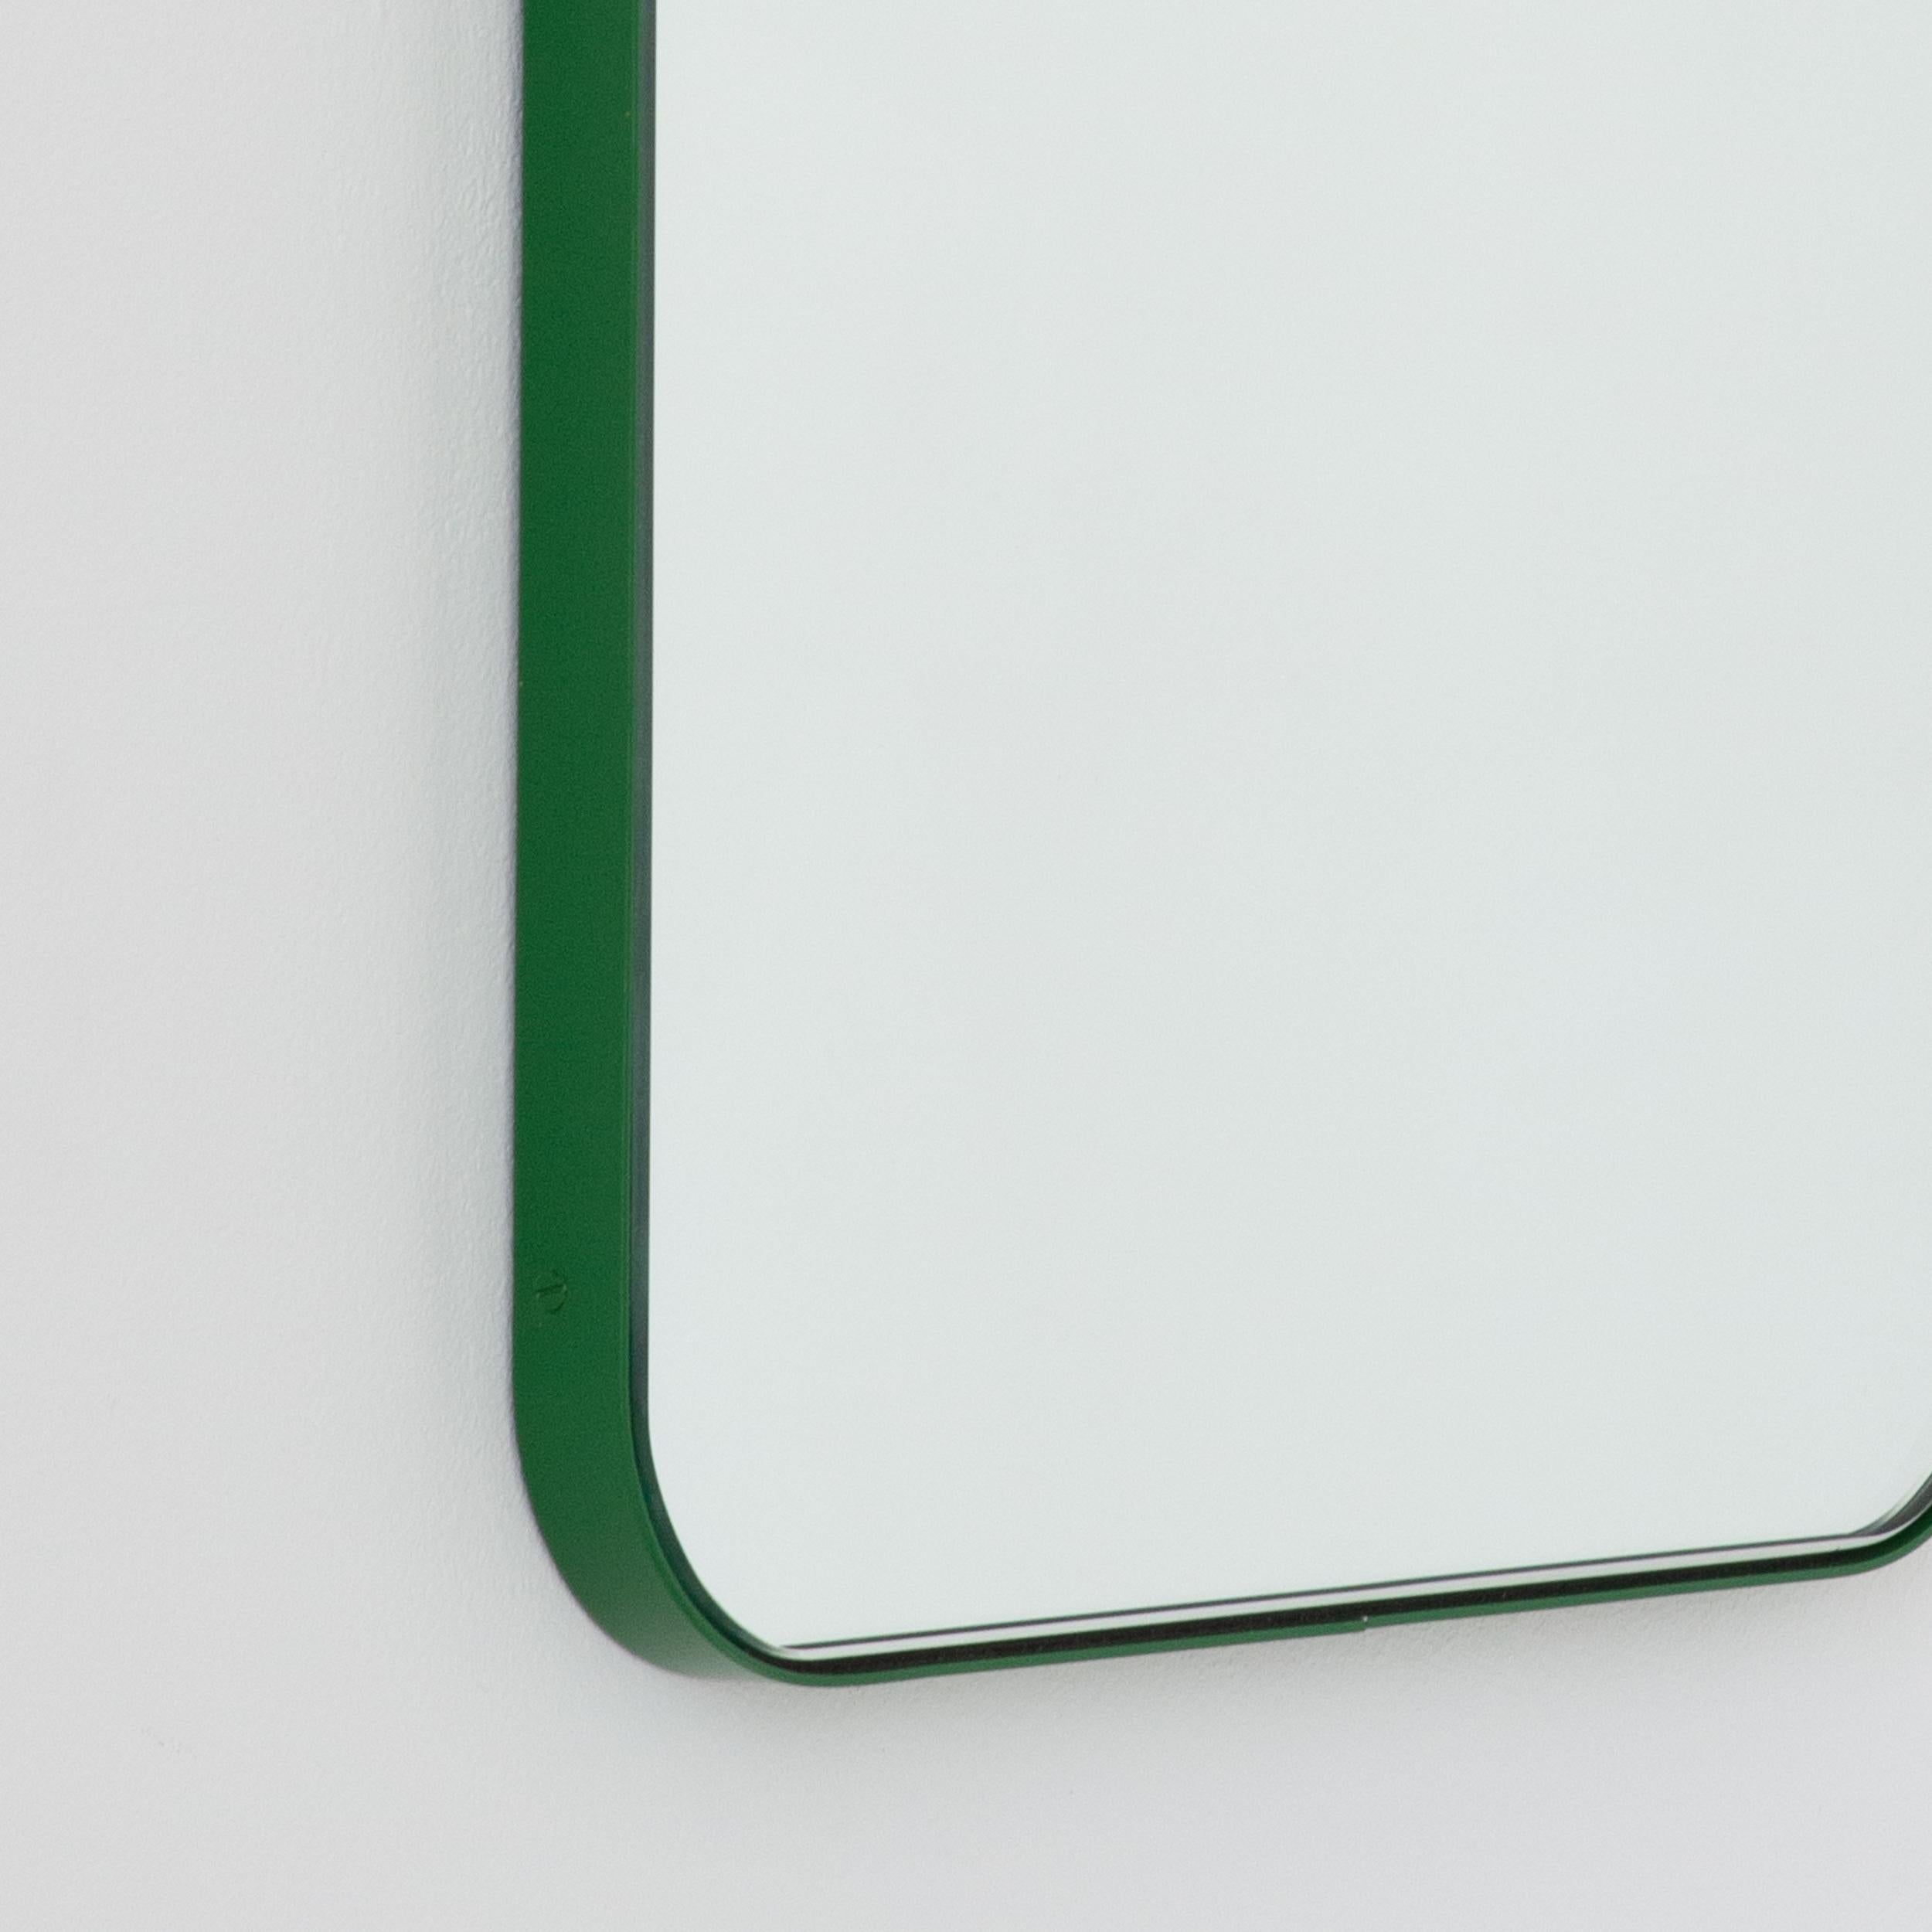 British Quadris Rectangular Modern Mirror with a Green Frame, Small For Sale